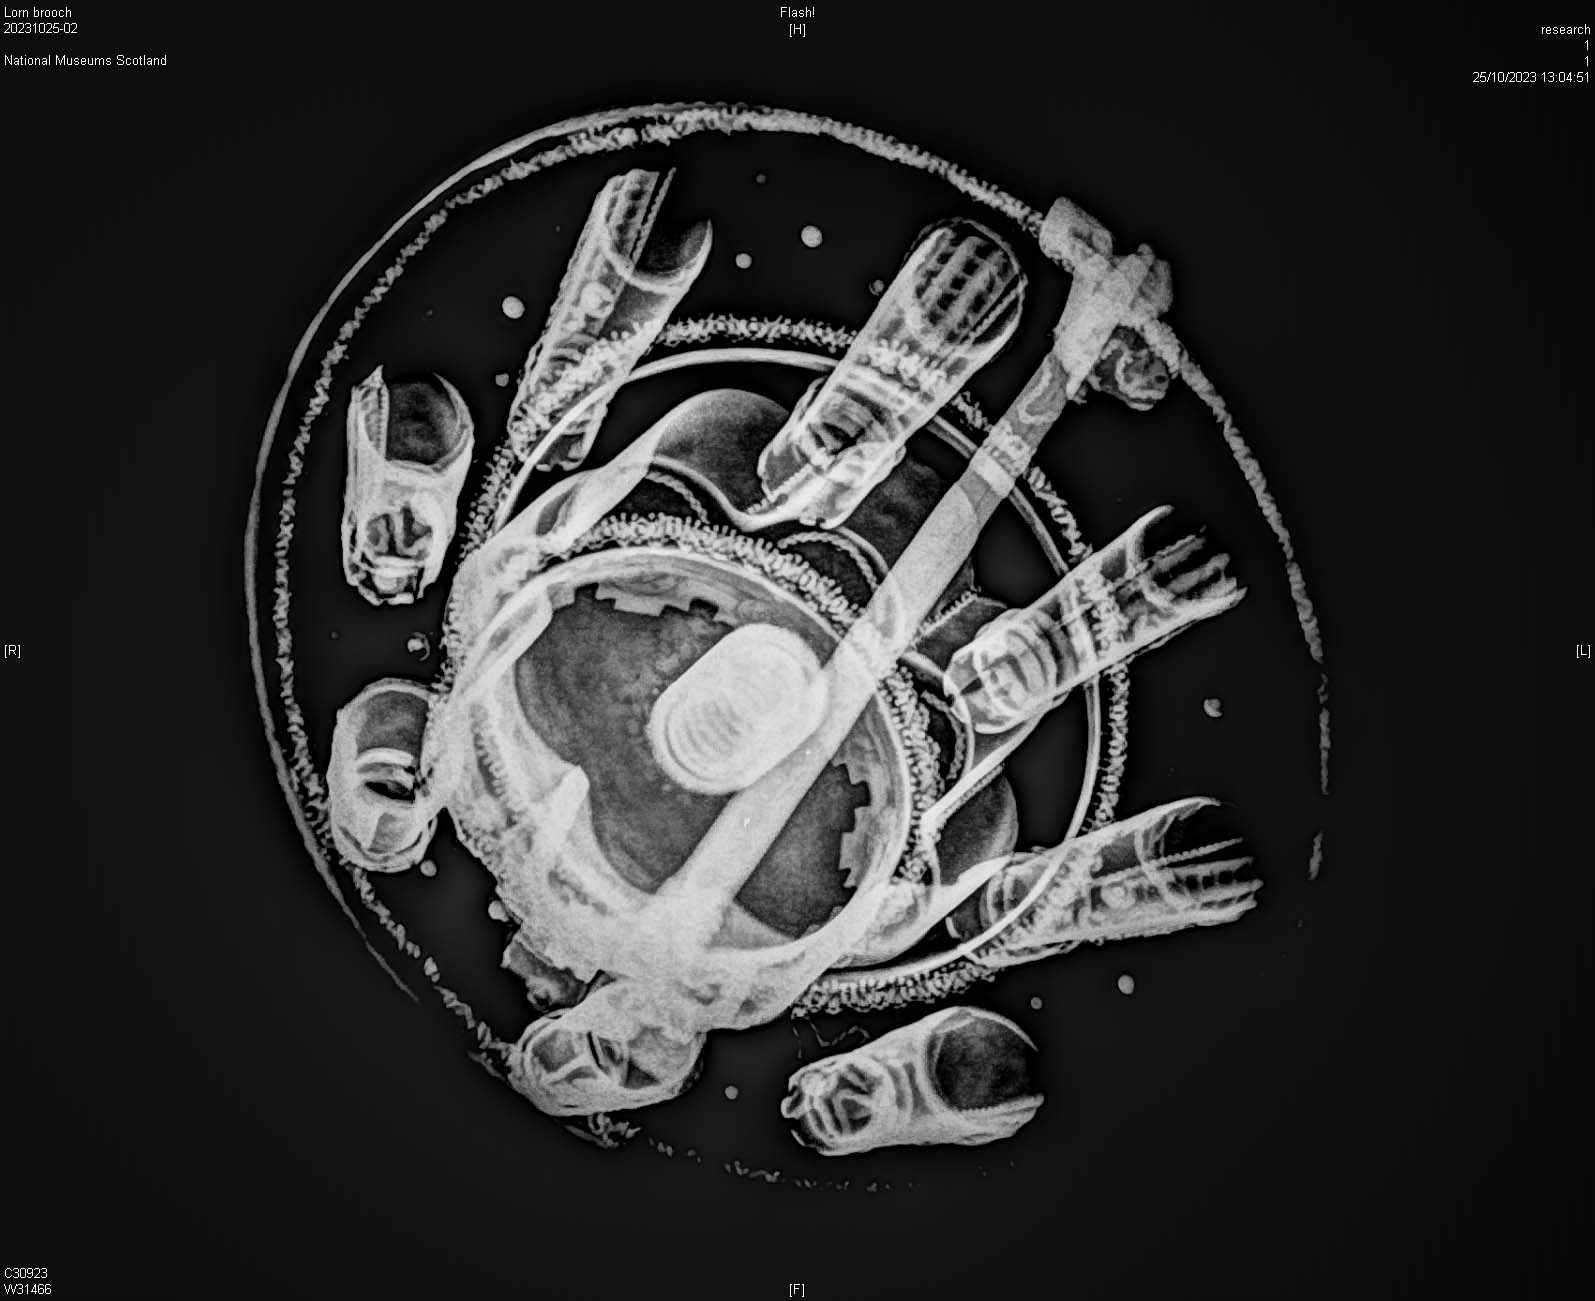 A black and white X-ray image of a brooch.